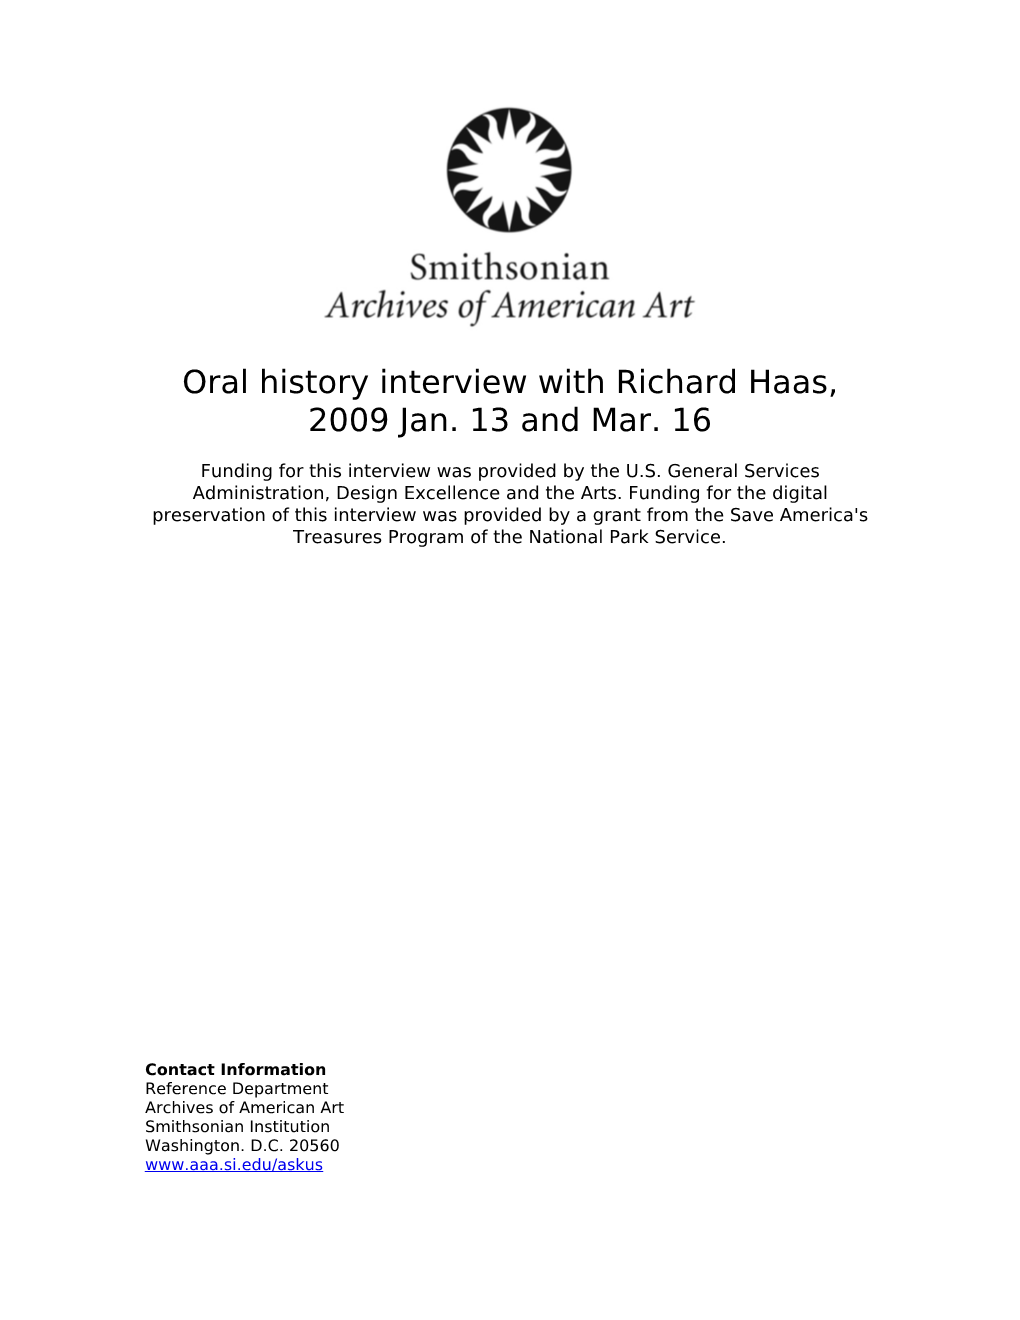 Oral History Interview with Richard Haas, 2009 Jan. 13 and Mar. 16